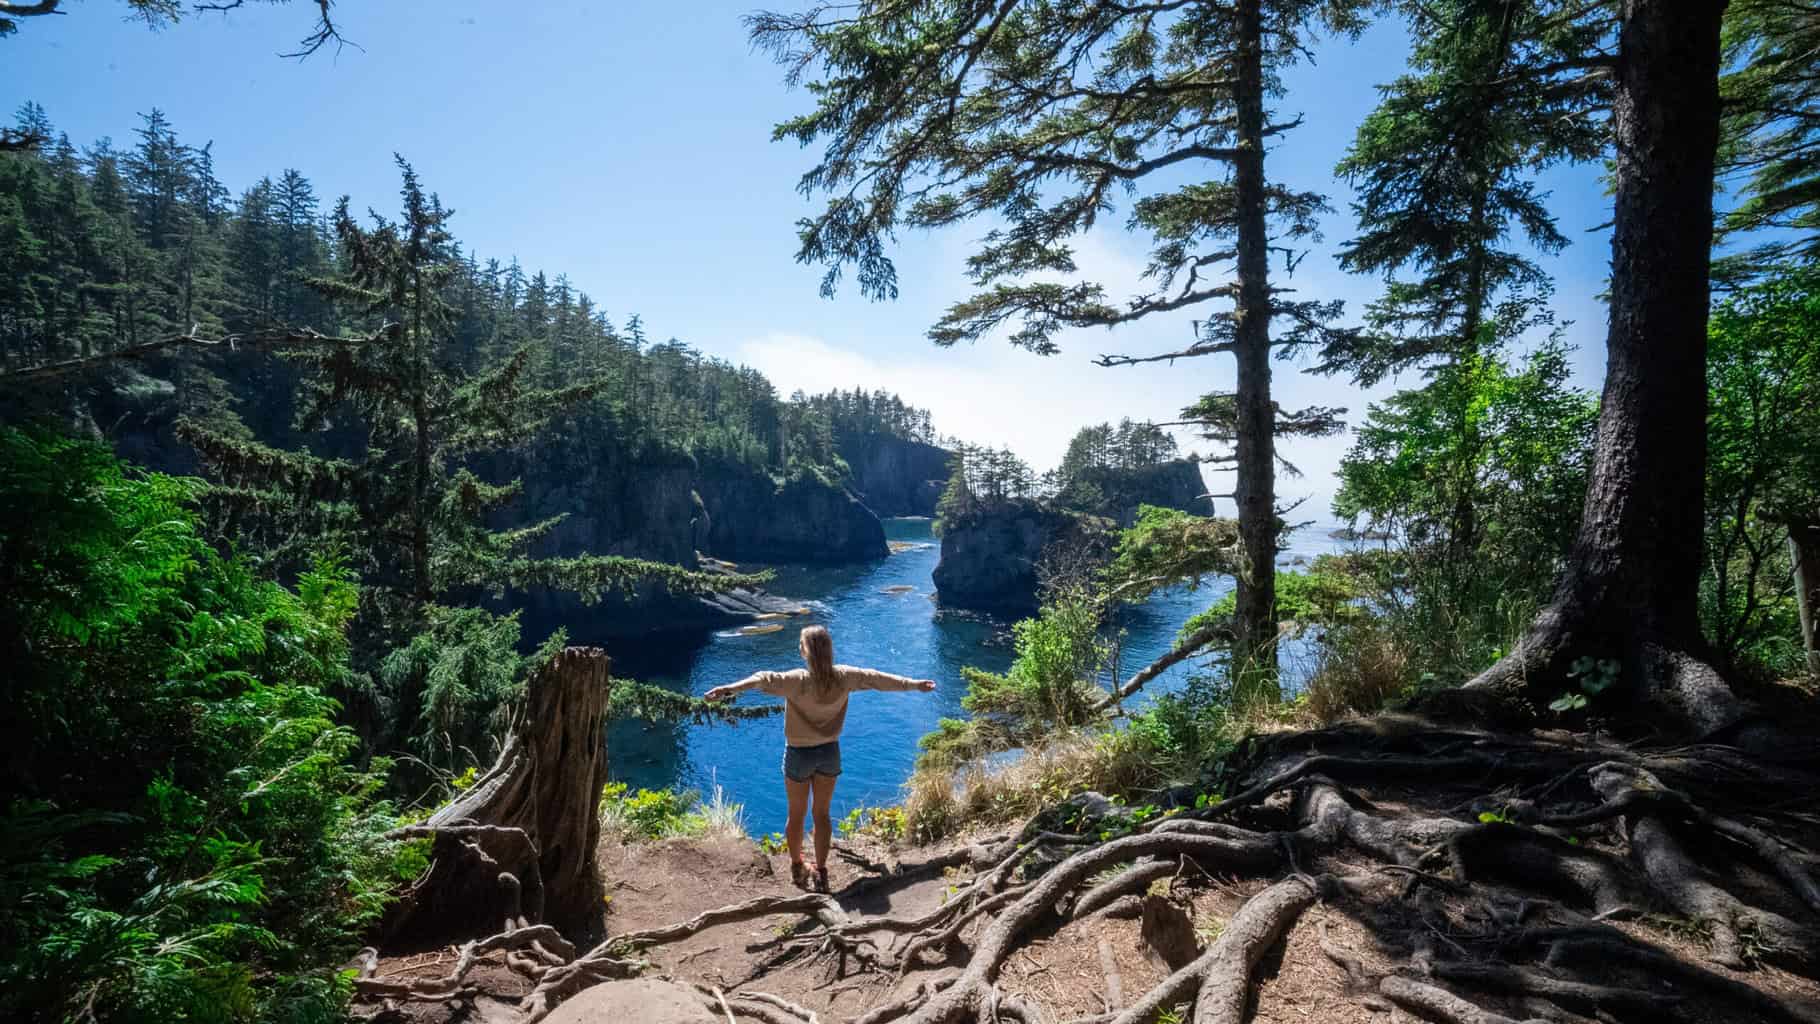 Alice Ford with arms outstretched overlooking Cape Flattery through evergreen trees during a 4-day hiking trip solo through Olympic National Park